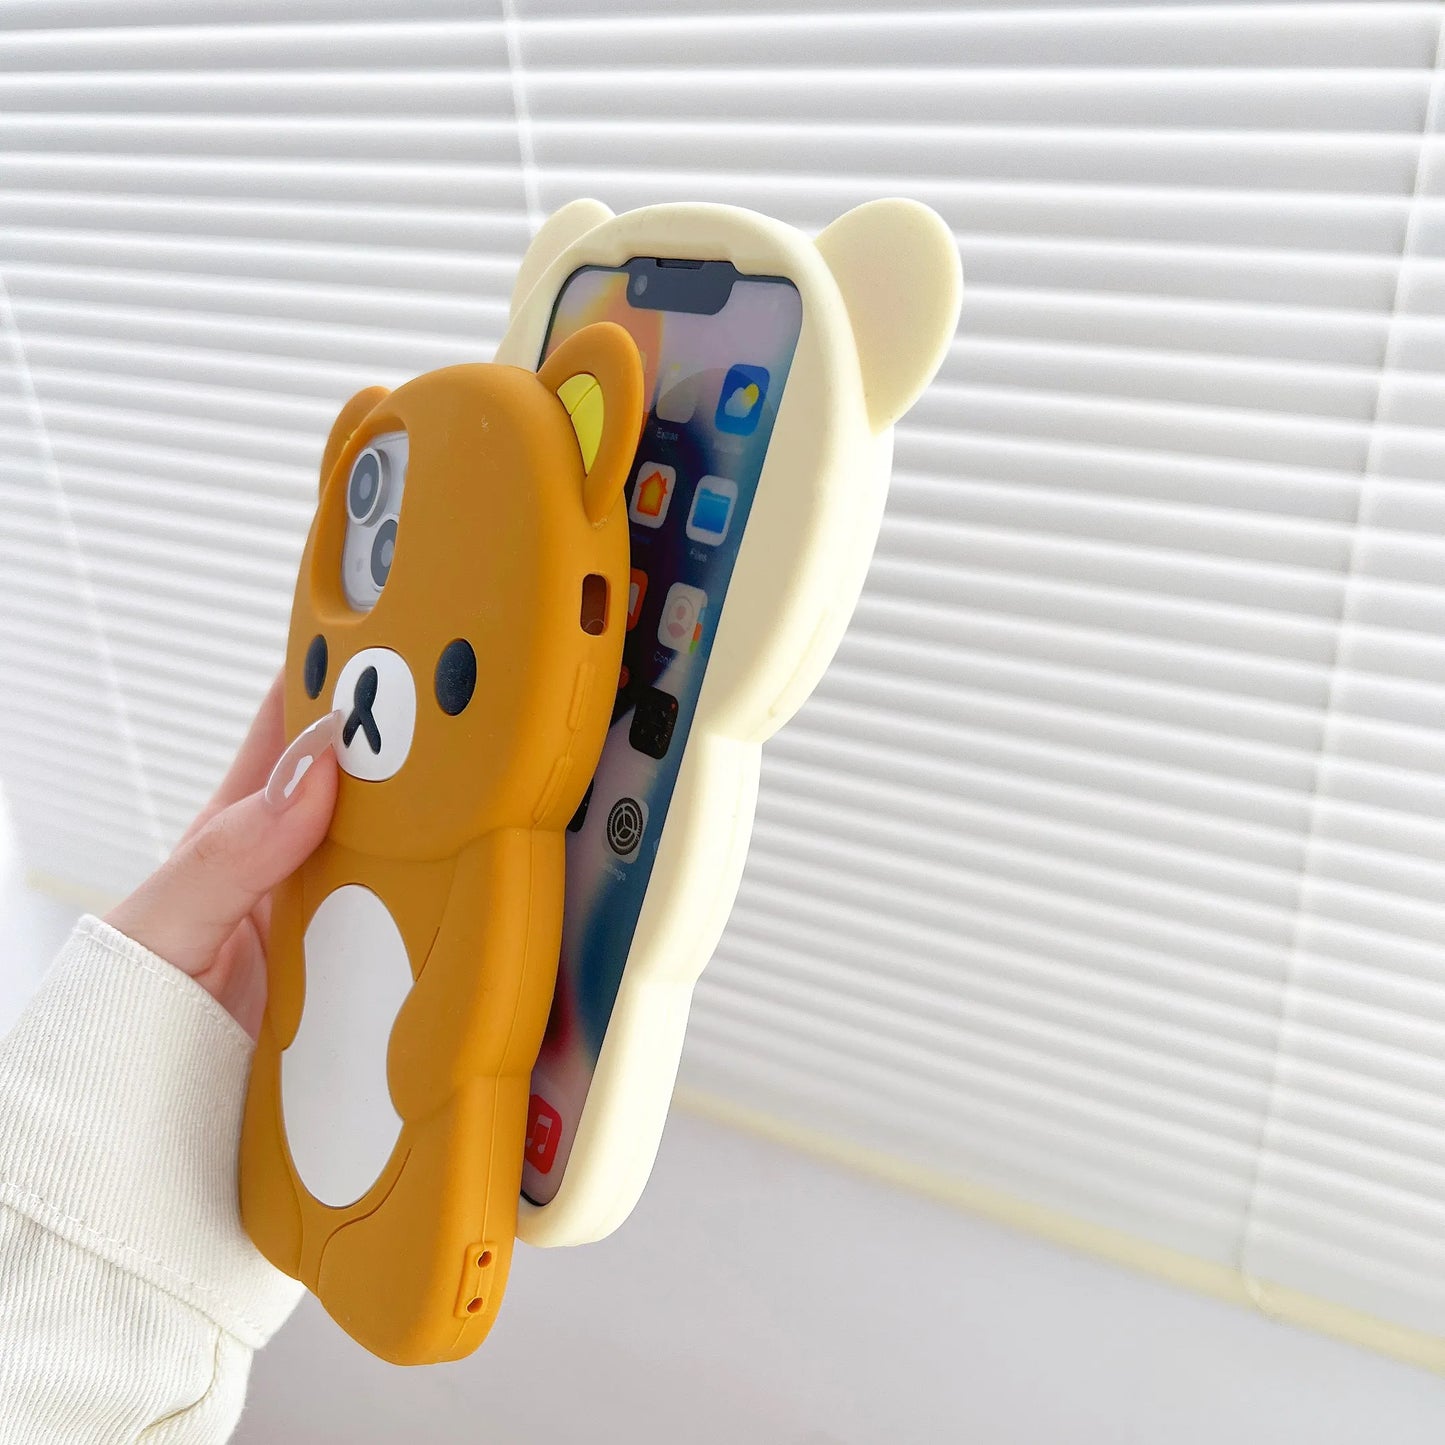 CUTE BEAR PHONE COVER FOR IPHONE